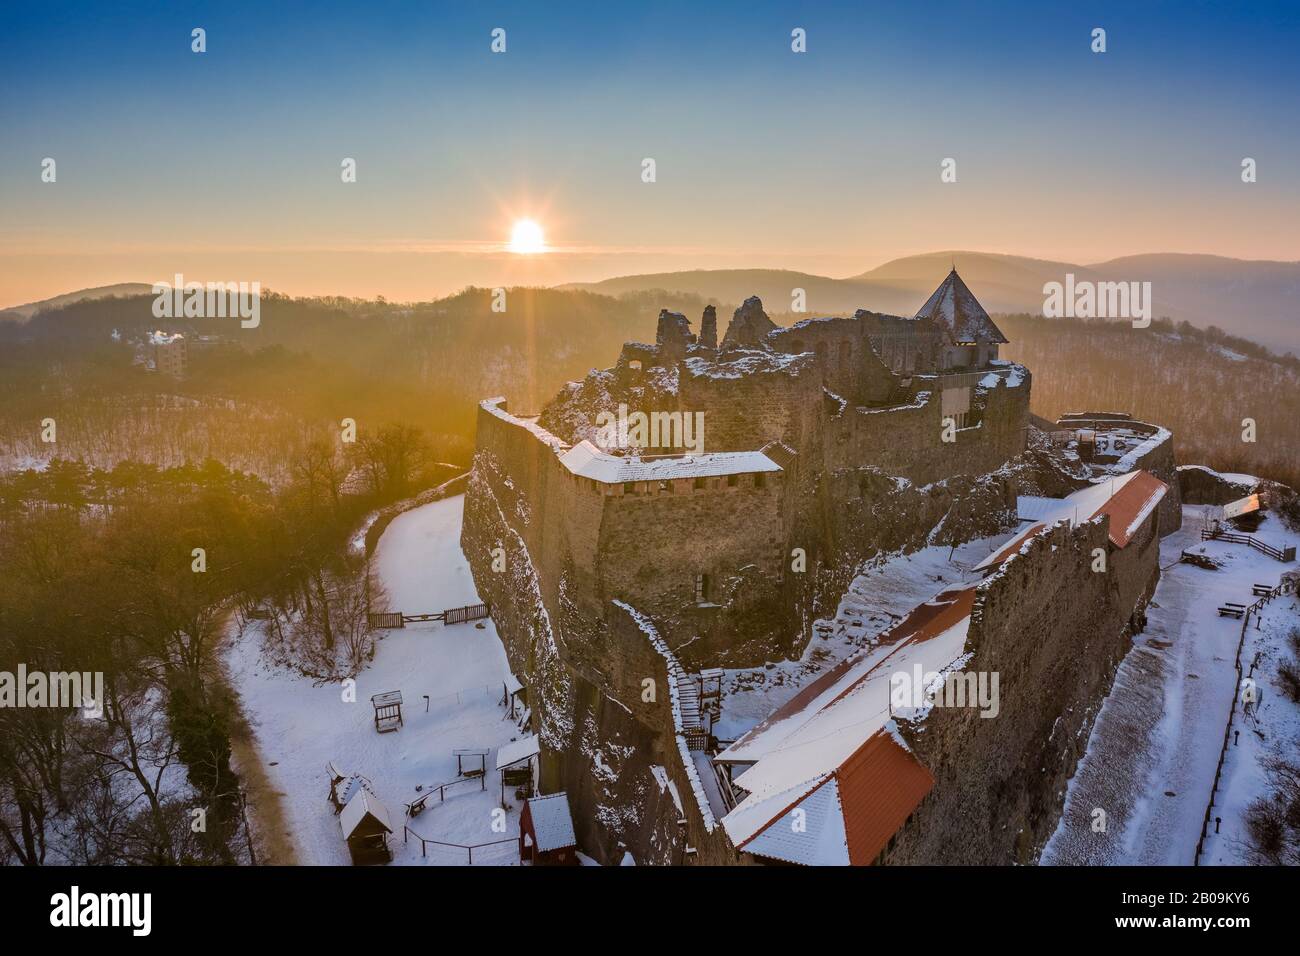 Visegrad, Hungary - The beautiful old high castle of Visegrad at sunrise on a winter morning with snow Stock Photo